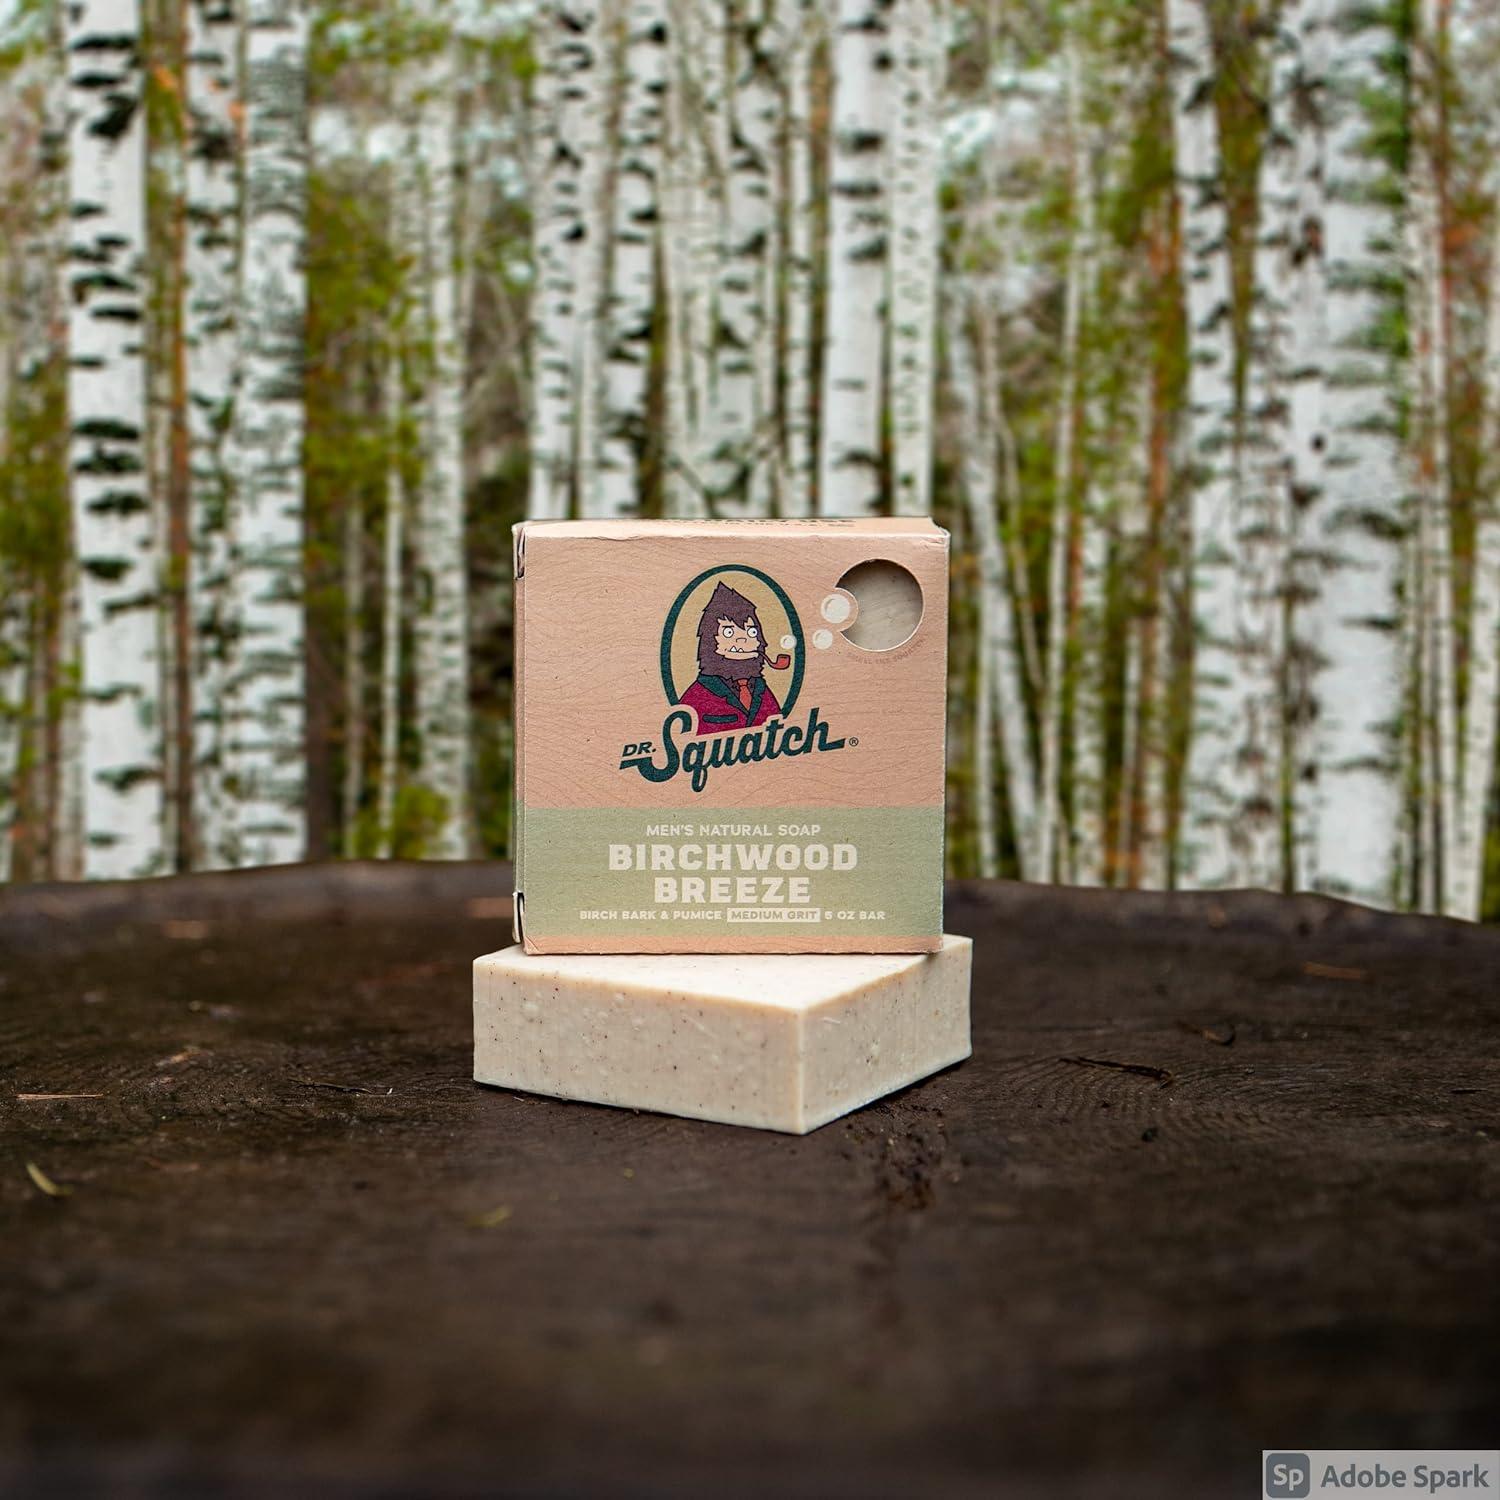 Dr. Squatch Basic Squatch Forest Pack - Pine Tar and Birchwood